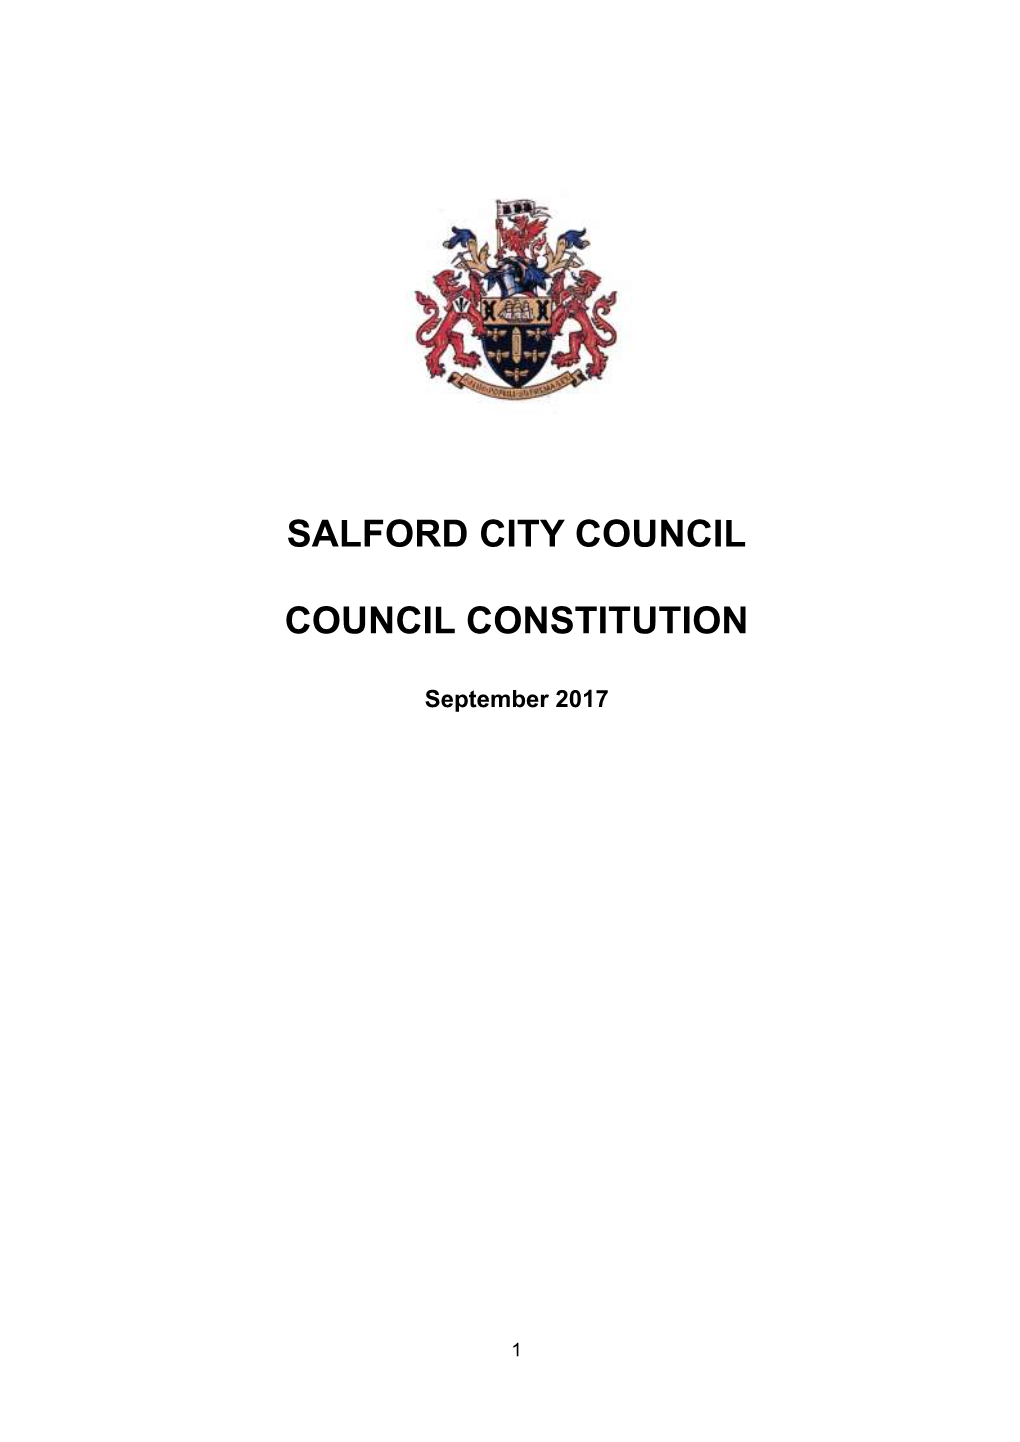 Salford City Council Council Constitution